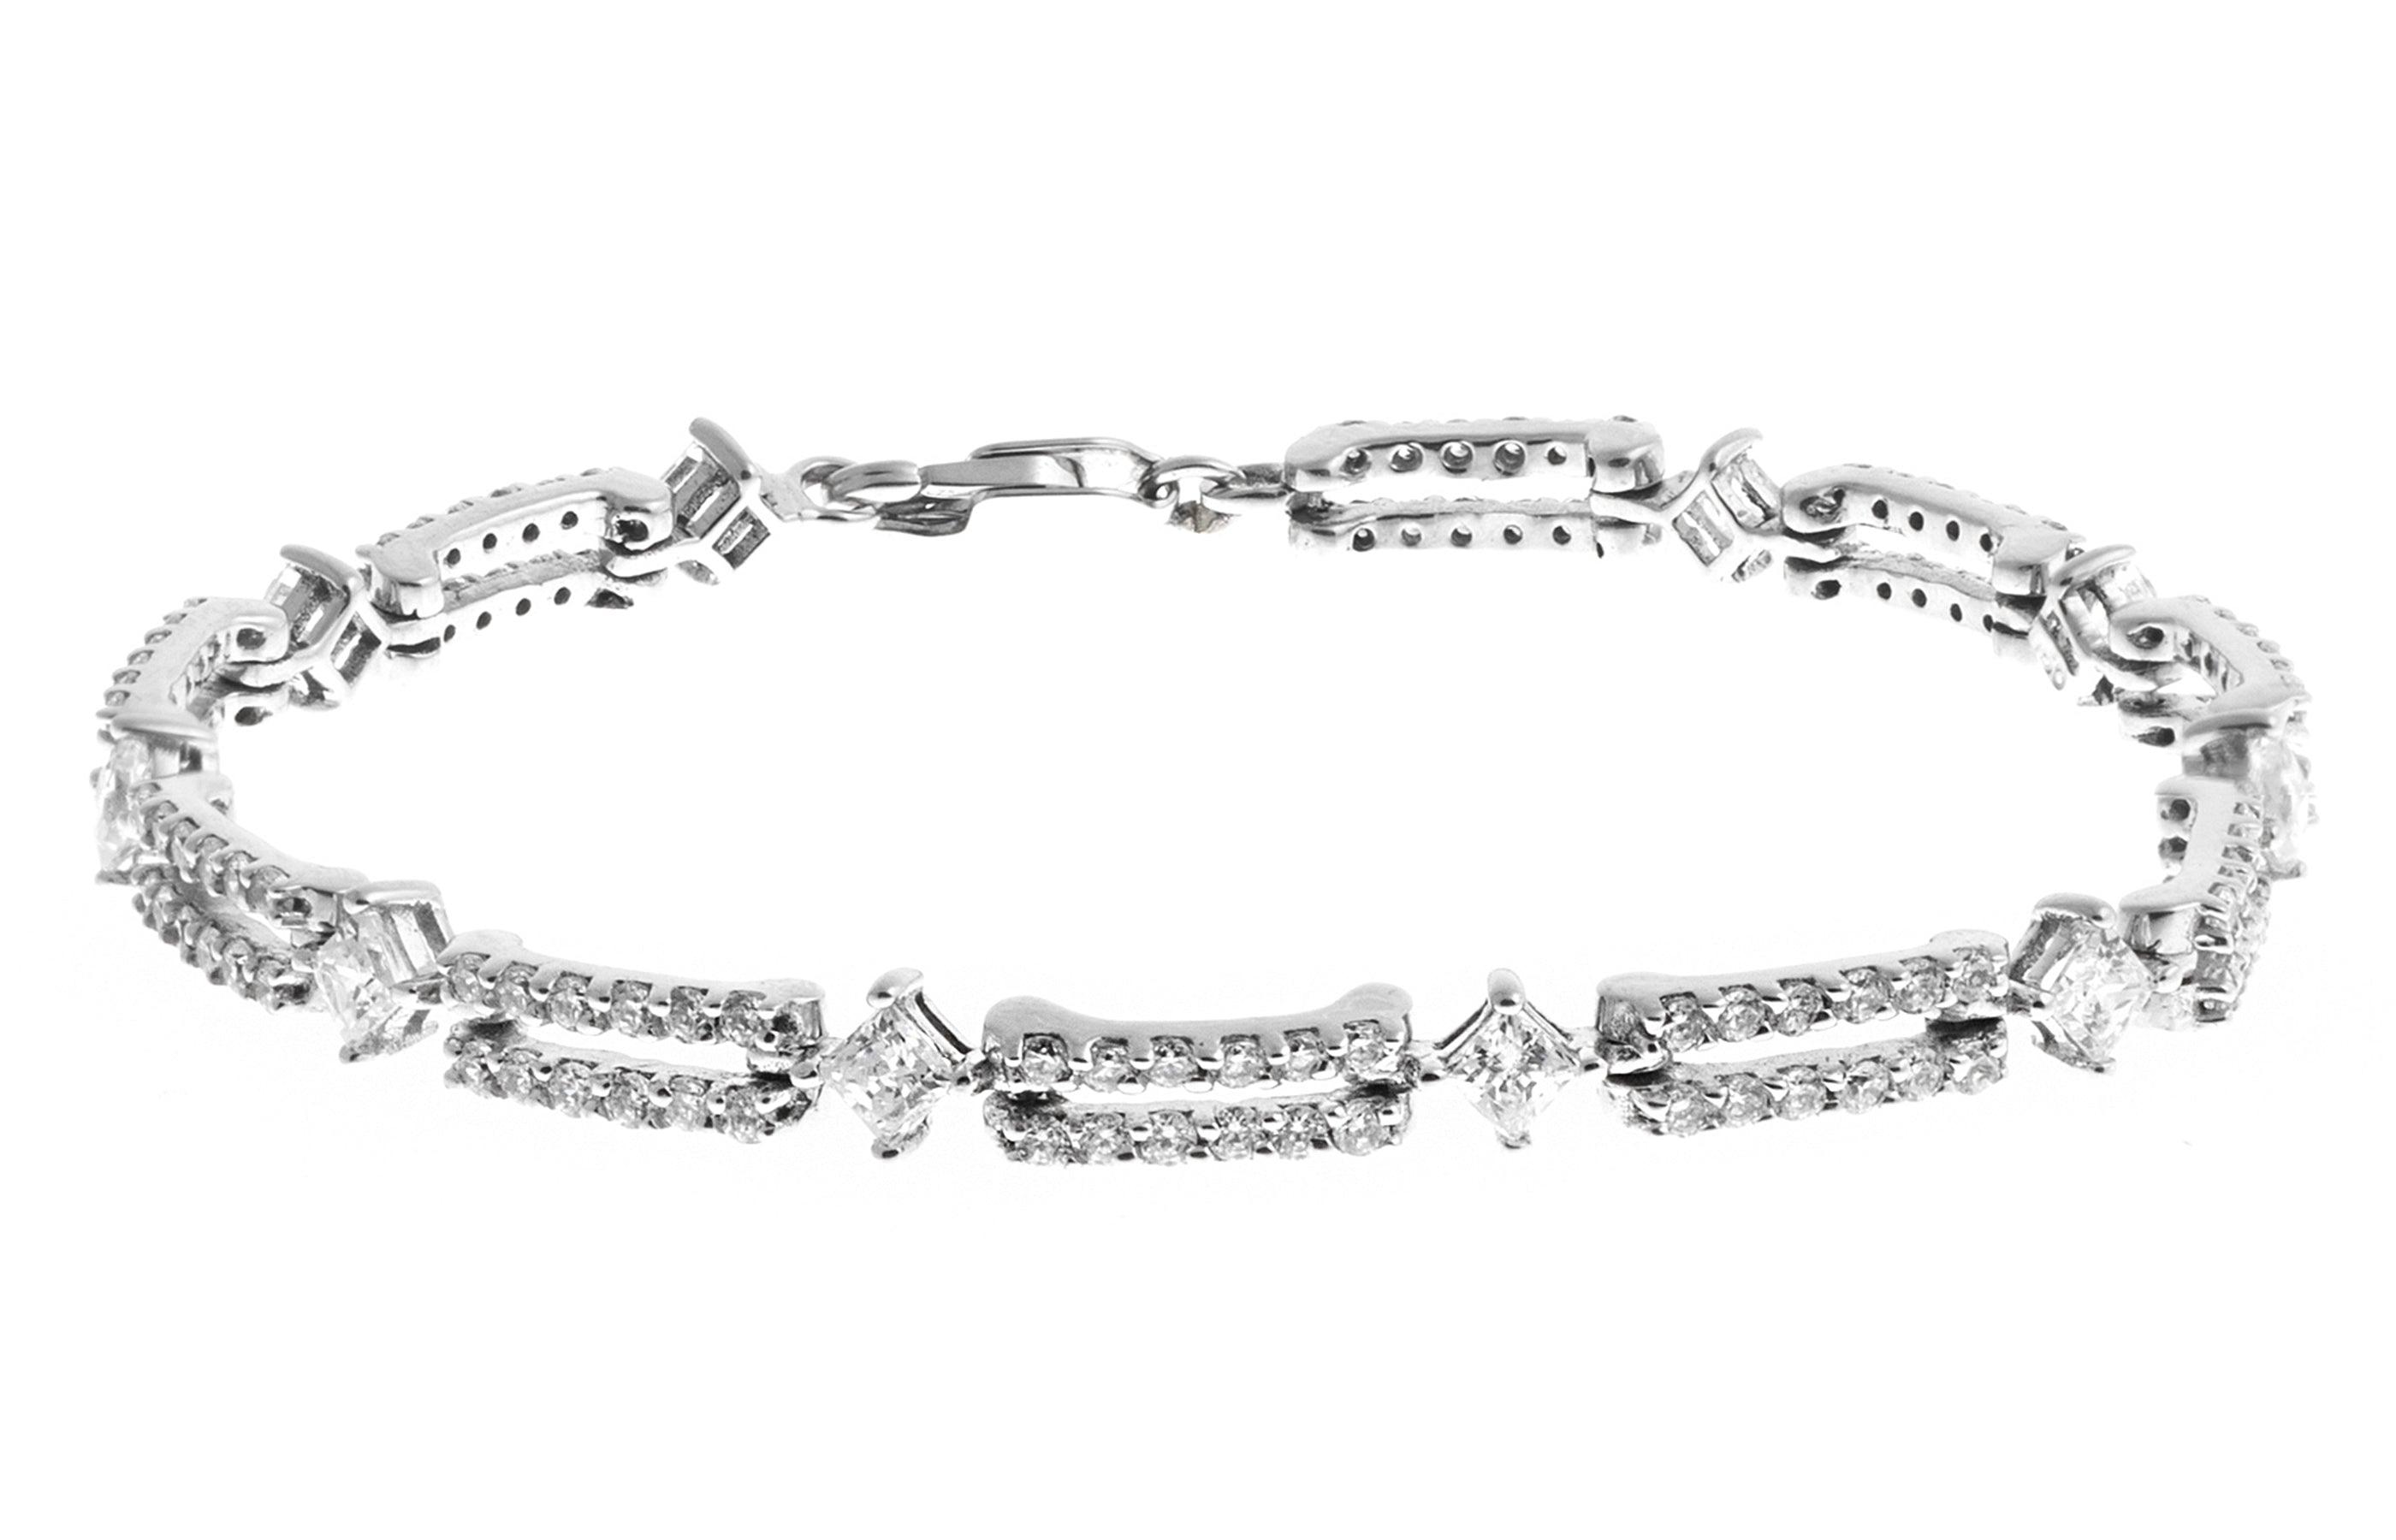 18ct White Gold Bracelet with Cubic Zirconia Stones (13.3g) LBR-1162 - Minar Jewellers